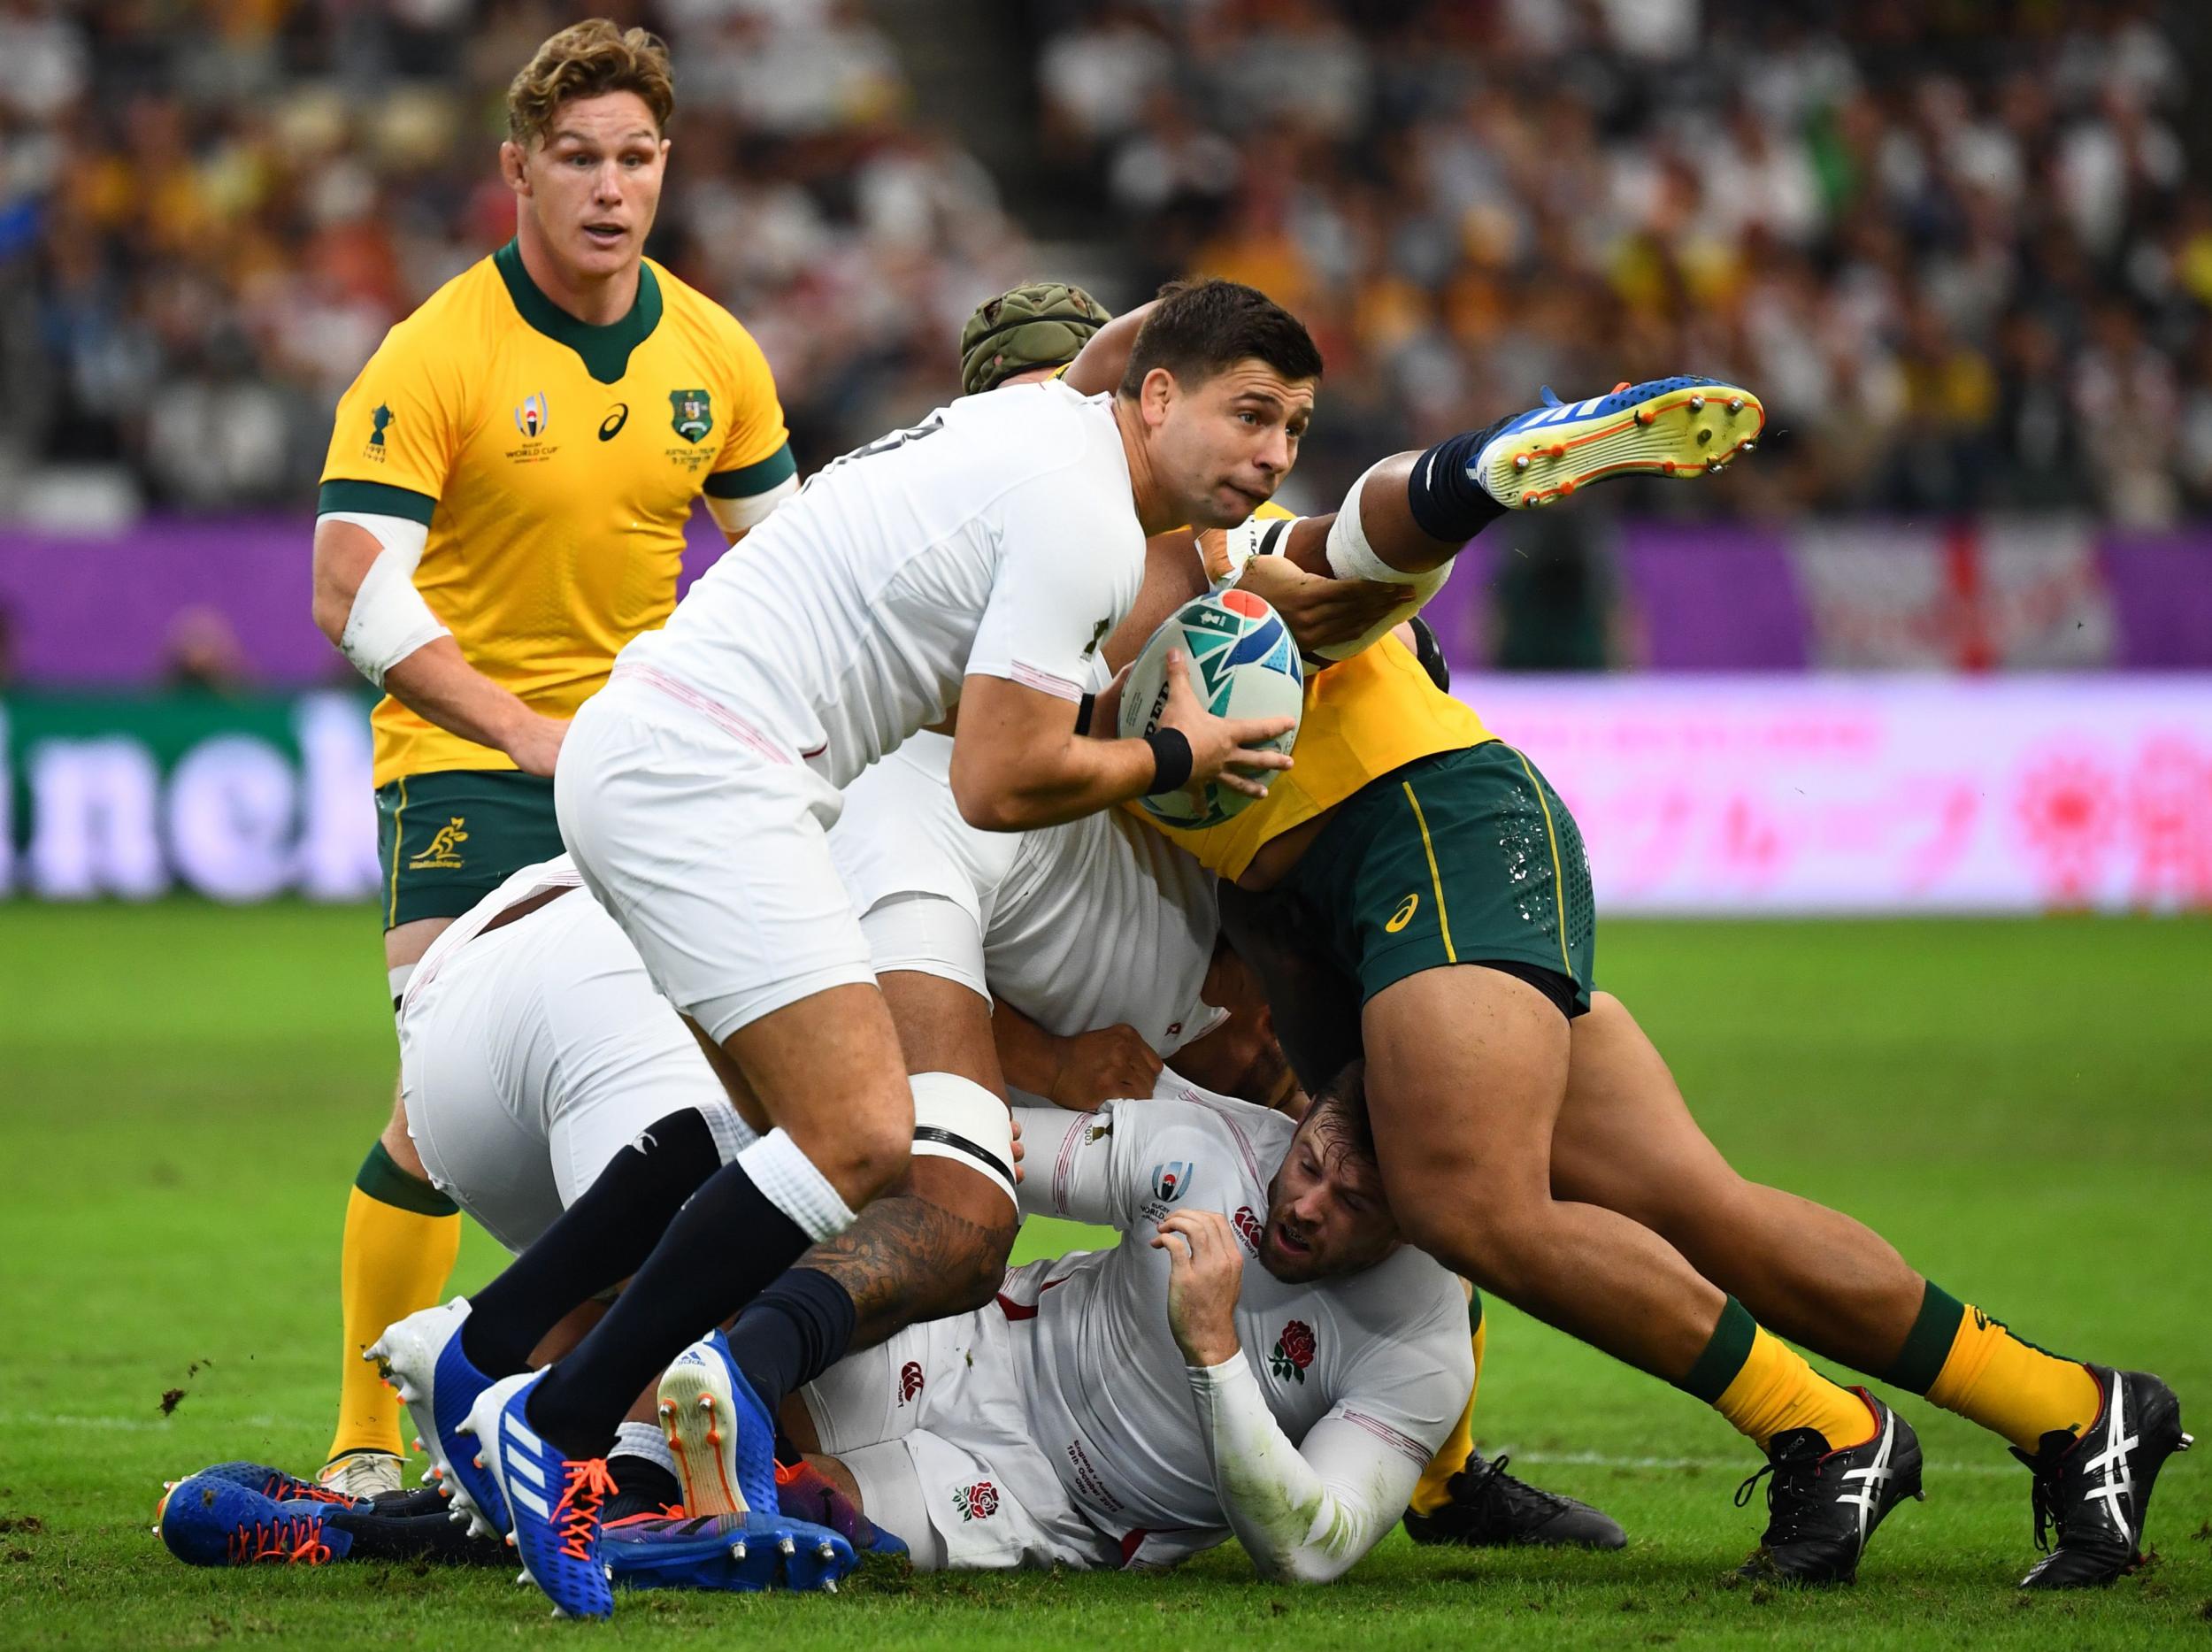 England vs Australia, Rugby World Cup 2019 LIVE: Stream, score and